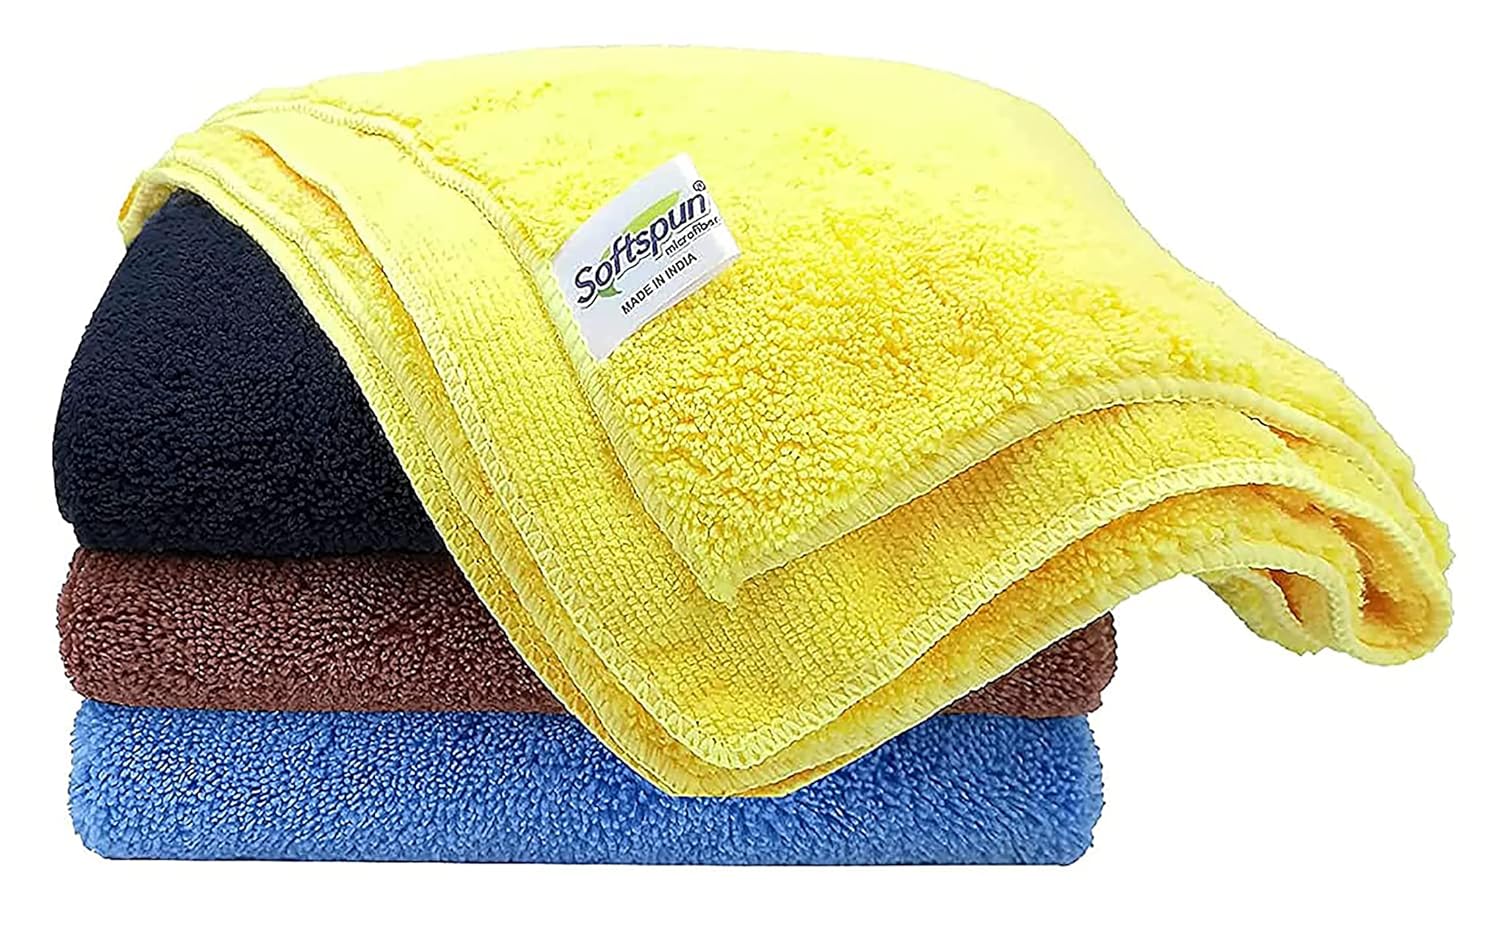 SOFTSPUN Microfiber High Loop Cleaning Cloths, 40x40 cms  pcs Towel Set 380 GSM  Highly Absorbent, Lint and Streak Free, Multi-Purpose Wash Cloth for Kitchen, Window, Silverware.